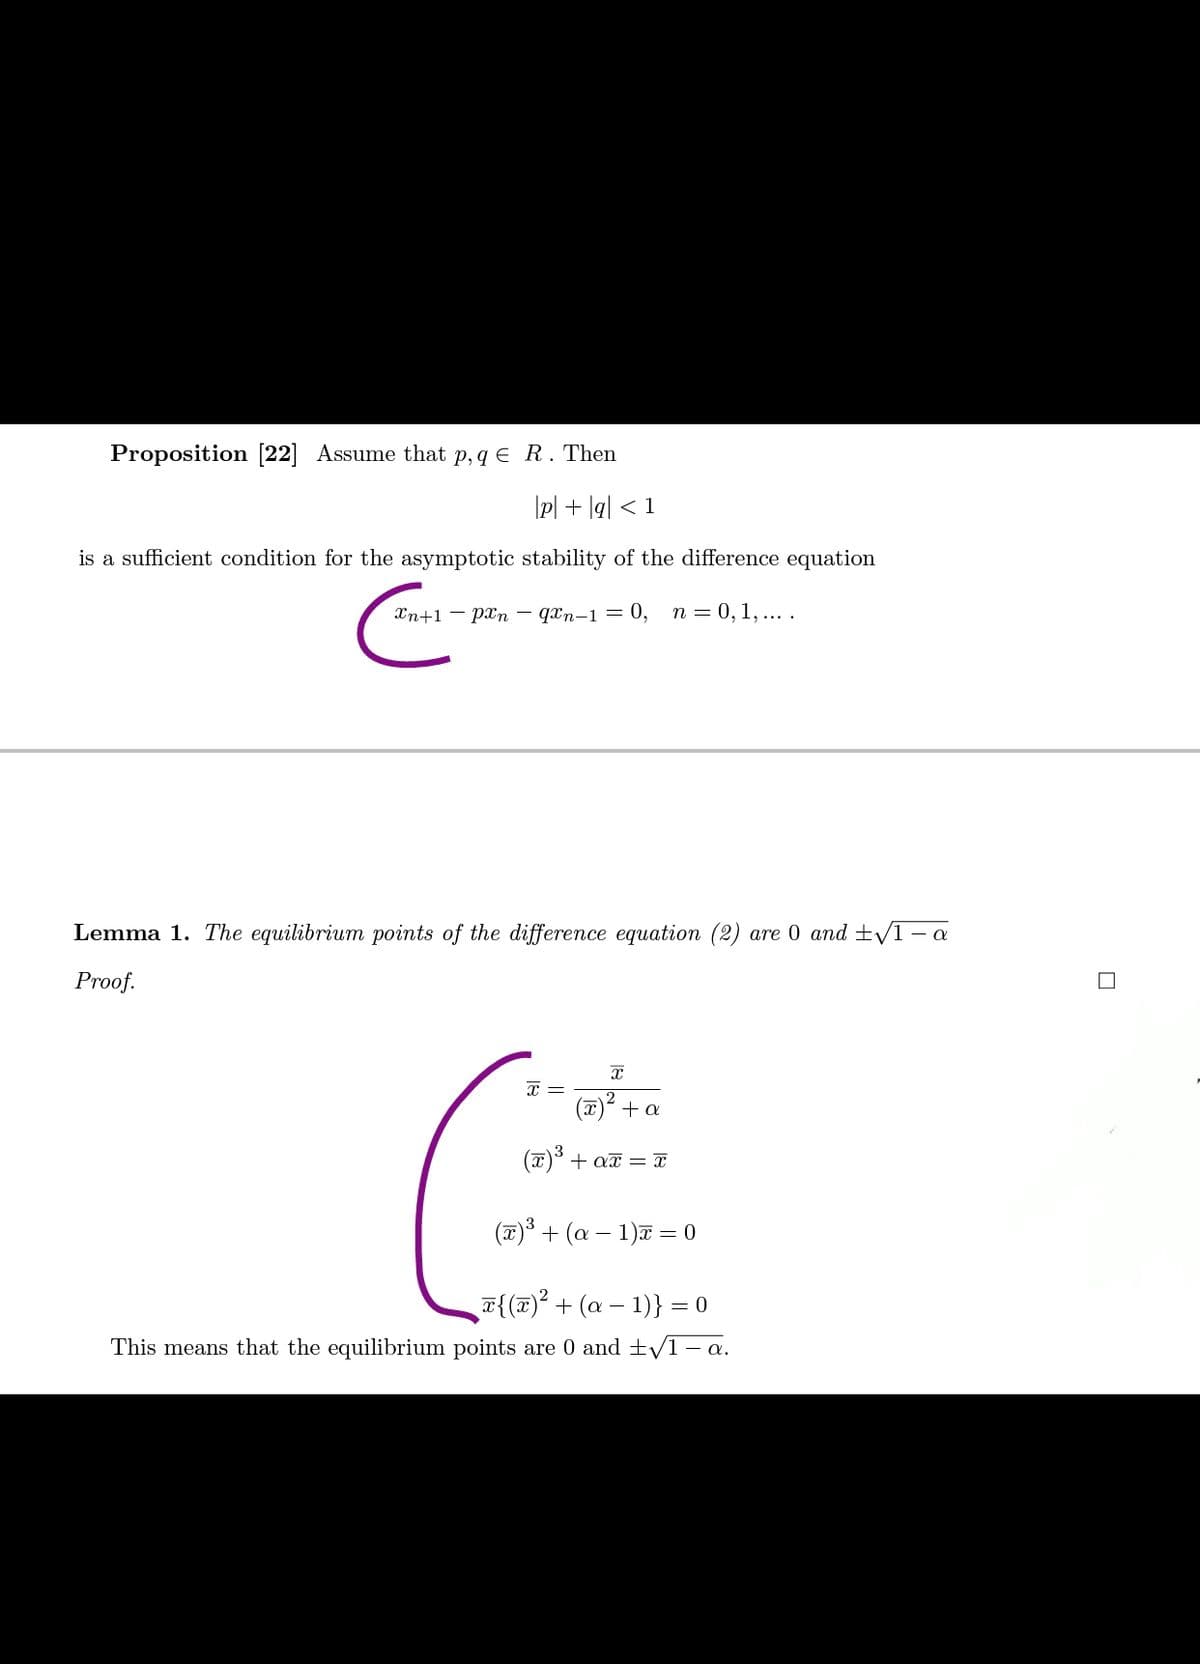 Proposition [22] Assume that p,q € R. Then
\p| + |q] < 1
is a sufficient condition for the asymptotic stability of the difference equation
Хn+1 — рап — qxn-1 — 0, п 3 0, 1,... .
Lemma 1. The equilibrium points of the difference equation (2) are 0 and ±/1- a
Proof.
(x)
+ a
(7)° + ax = X
(7) + (a – 1) = 0
7{(T) + (a – 1)} = 0
This means that the equilibrium points are 0 and ±/1 – a.
